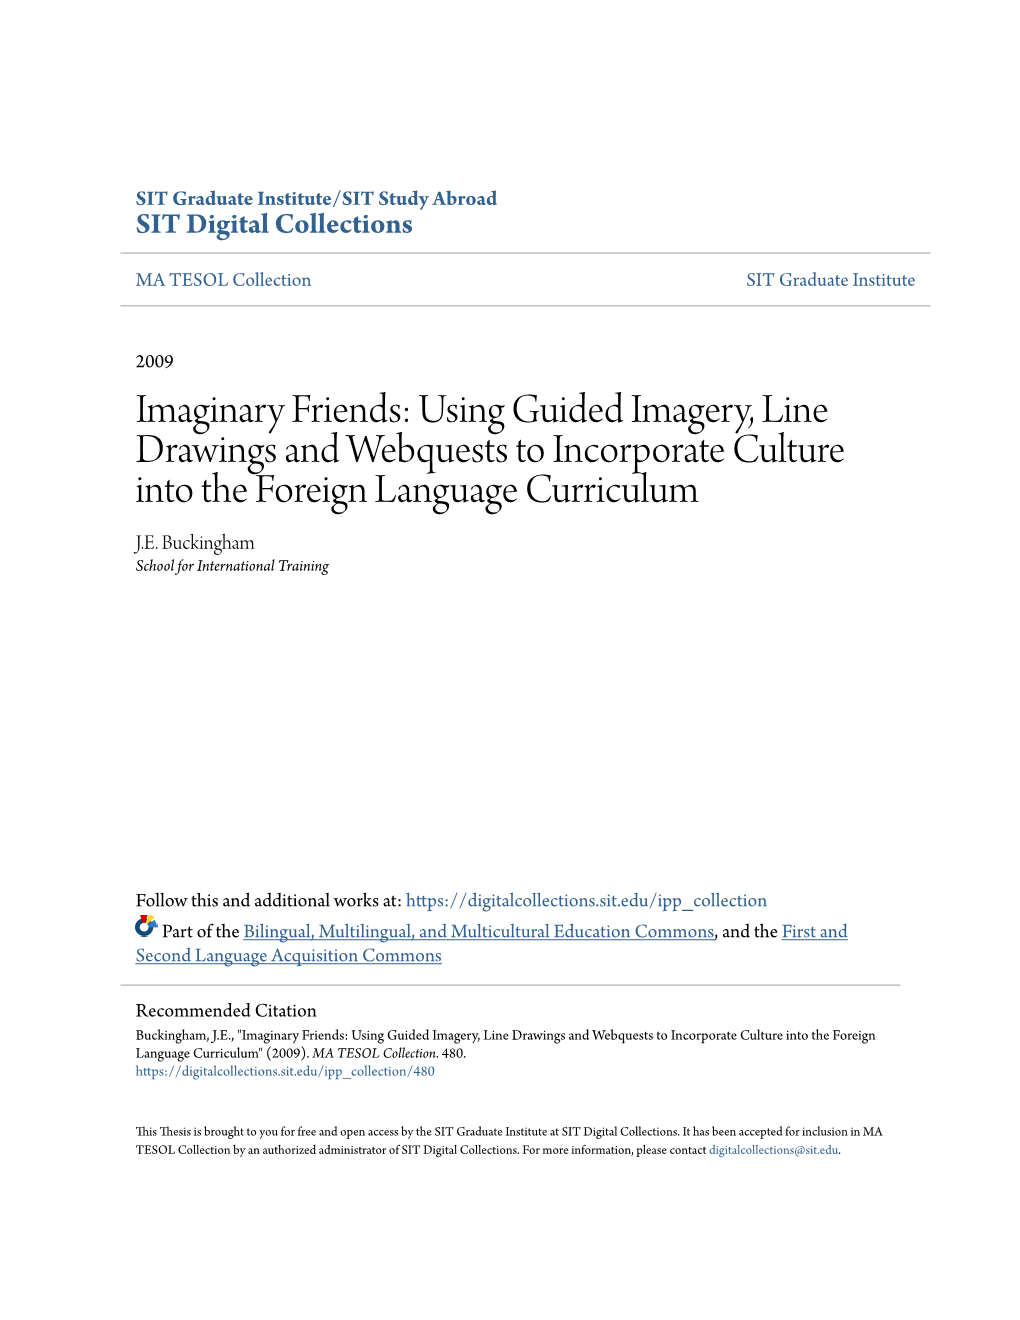 Imaginary Friends: Using Guided Imagery, Line Drawings and Webquests to Incorporate Culture Into the Foreign Language Curriculum J.E